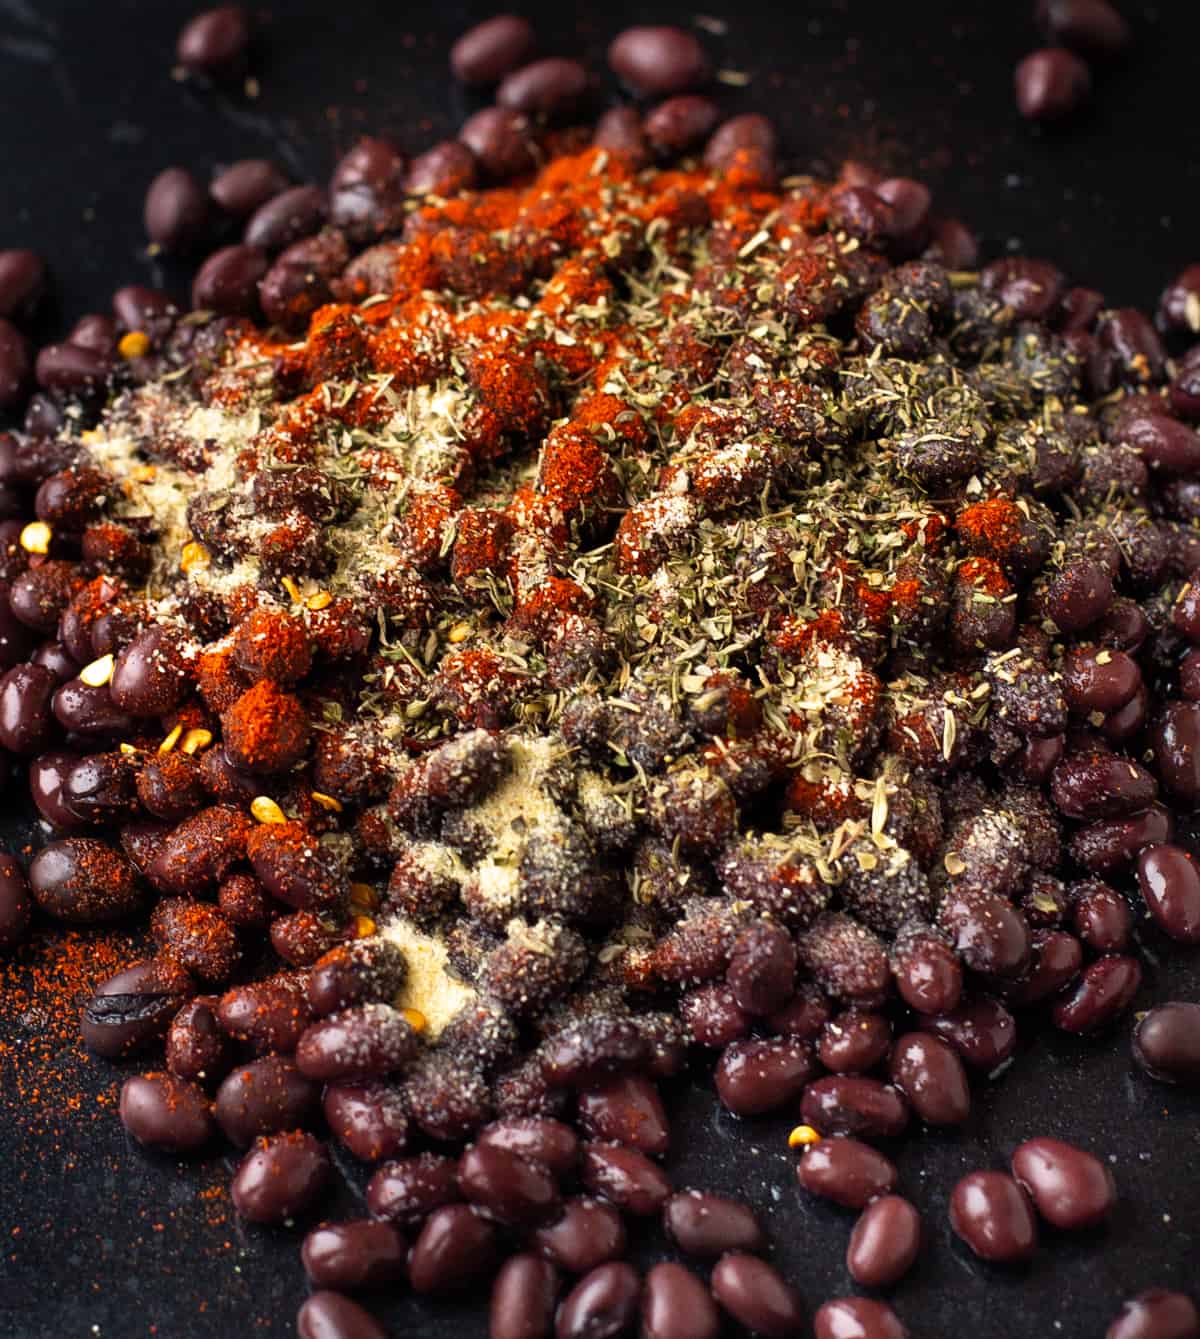 Black beans sprinkled with various dried herbs and spices.